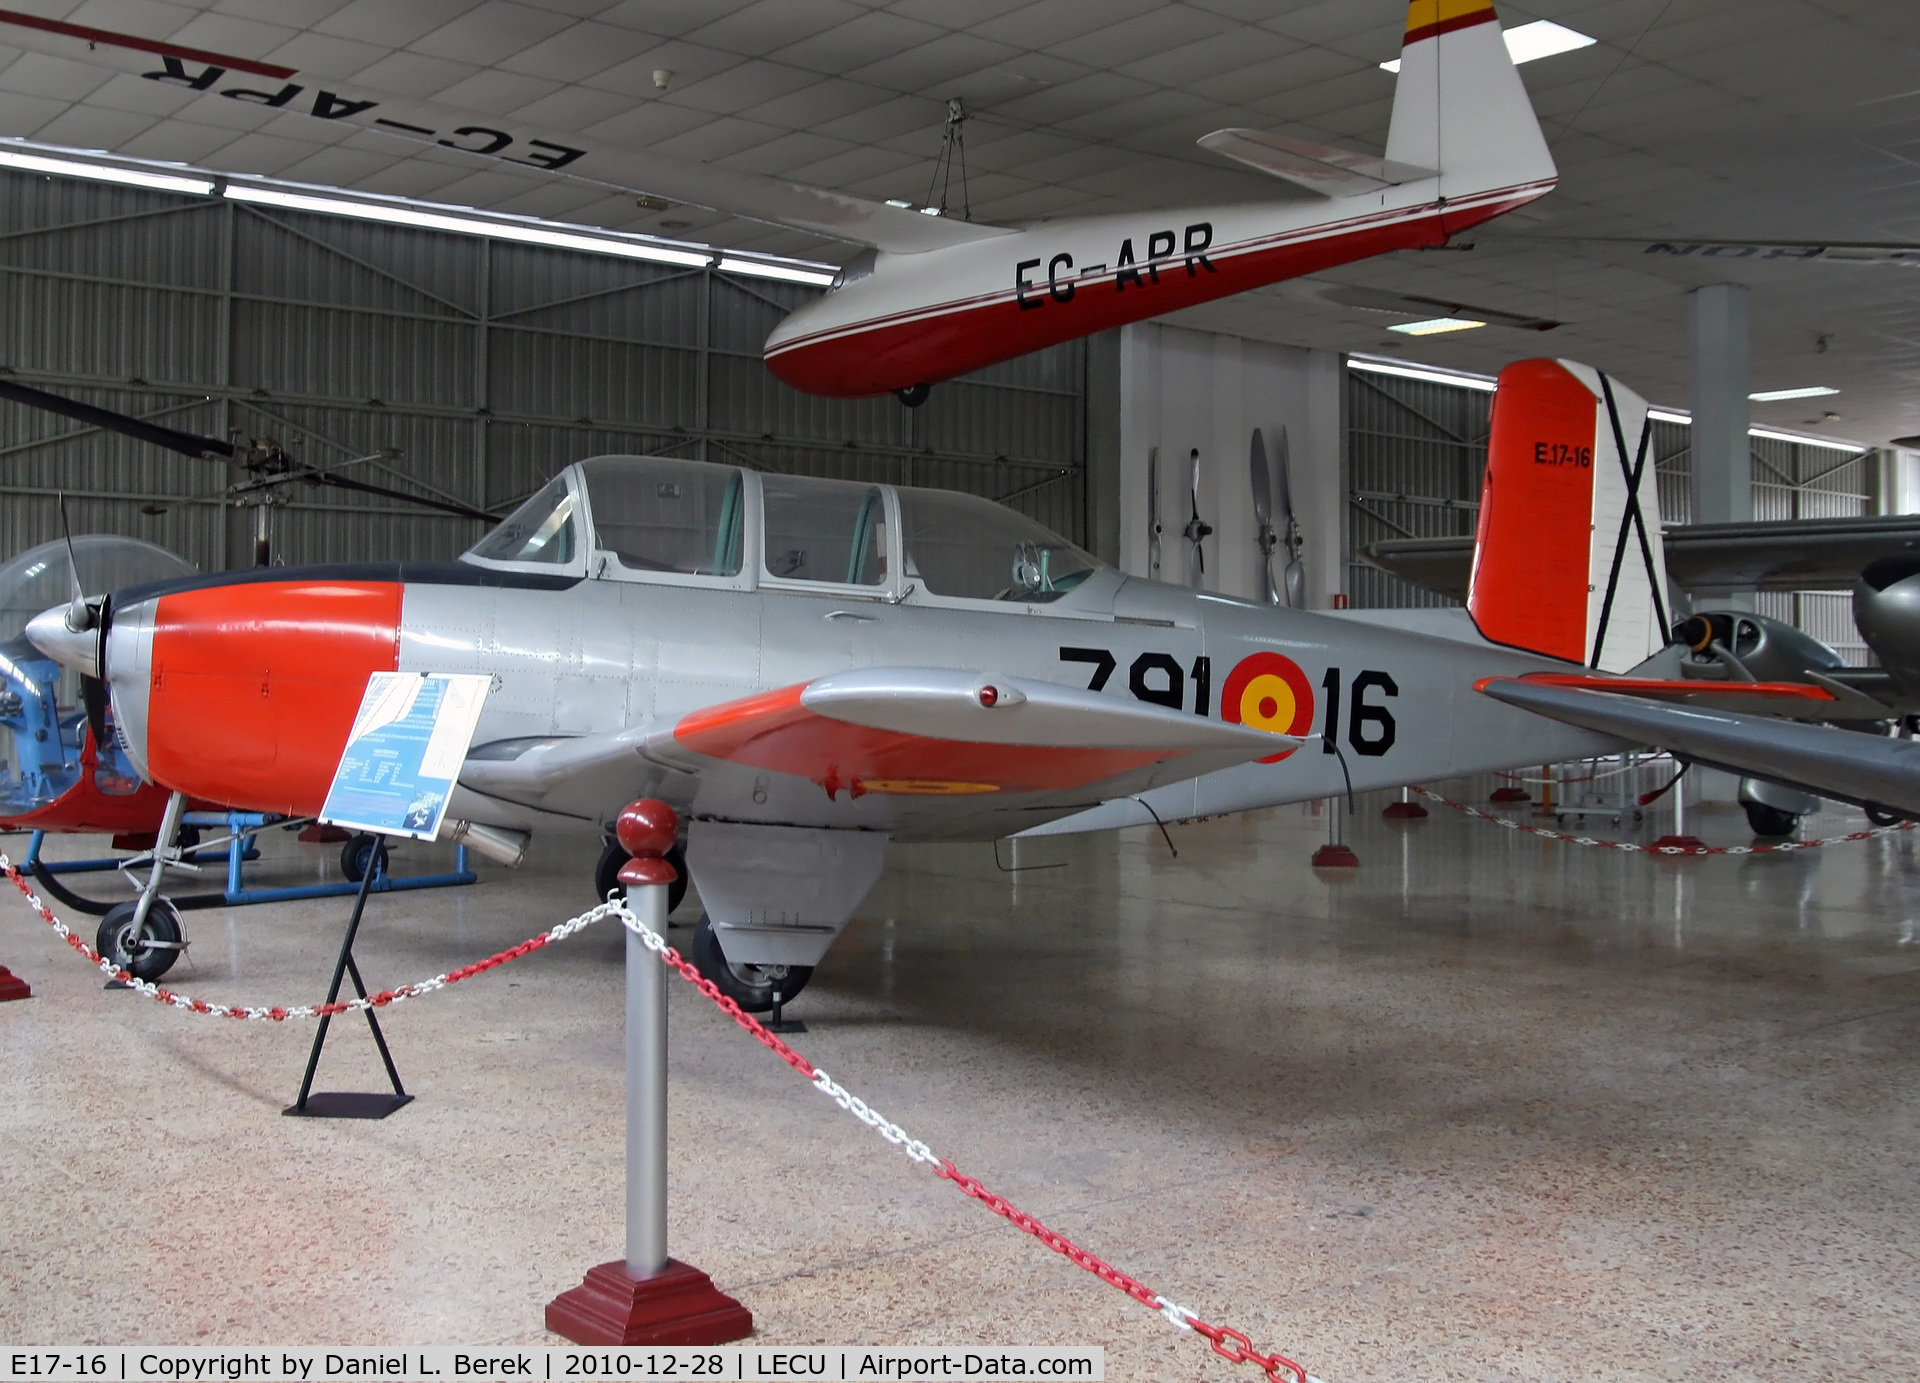 E17-16, 1955 Beech T-34A (A45) Mentor C/N G-786, Spanish Air Force example on display at the Museo del Aire, Madrid.